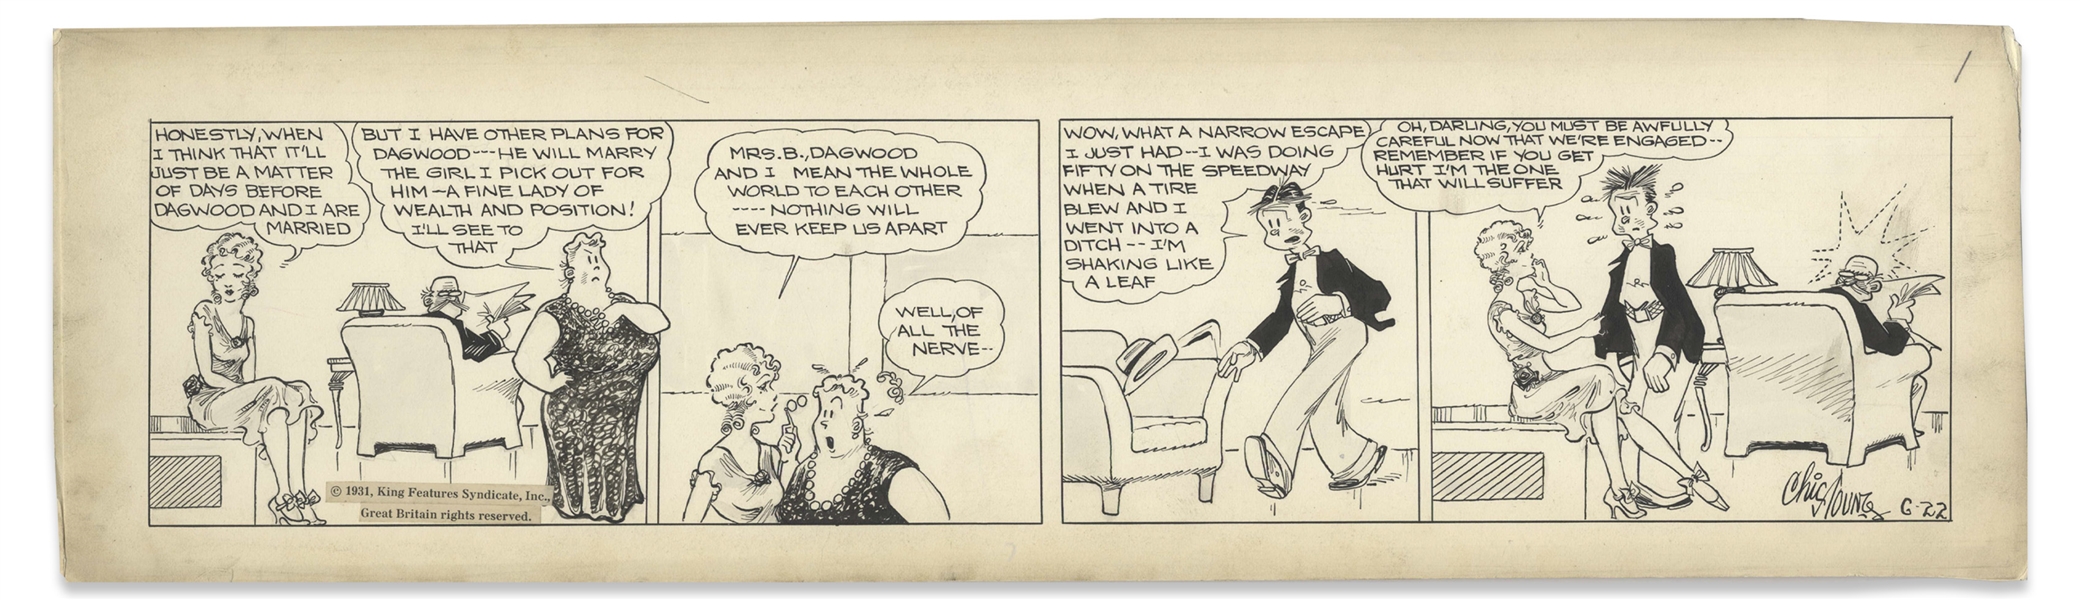 Chic Young Hand-Drawn ''Blondie'' Comic Strip From 1931 Titled ''How'd she figure that out?'' -- Blondie's Upset After Dagwood Crashes His Car